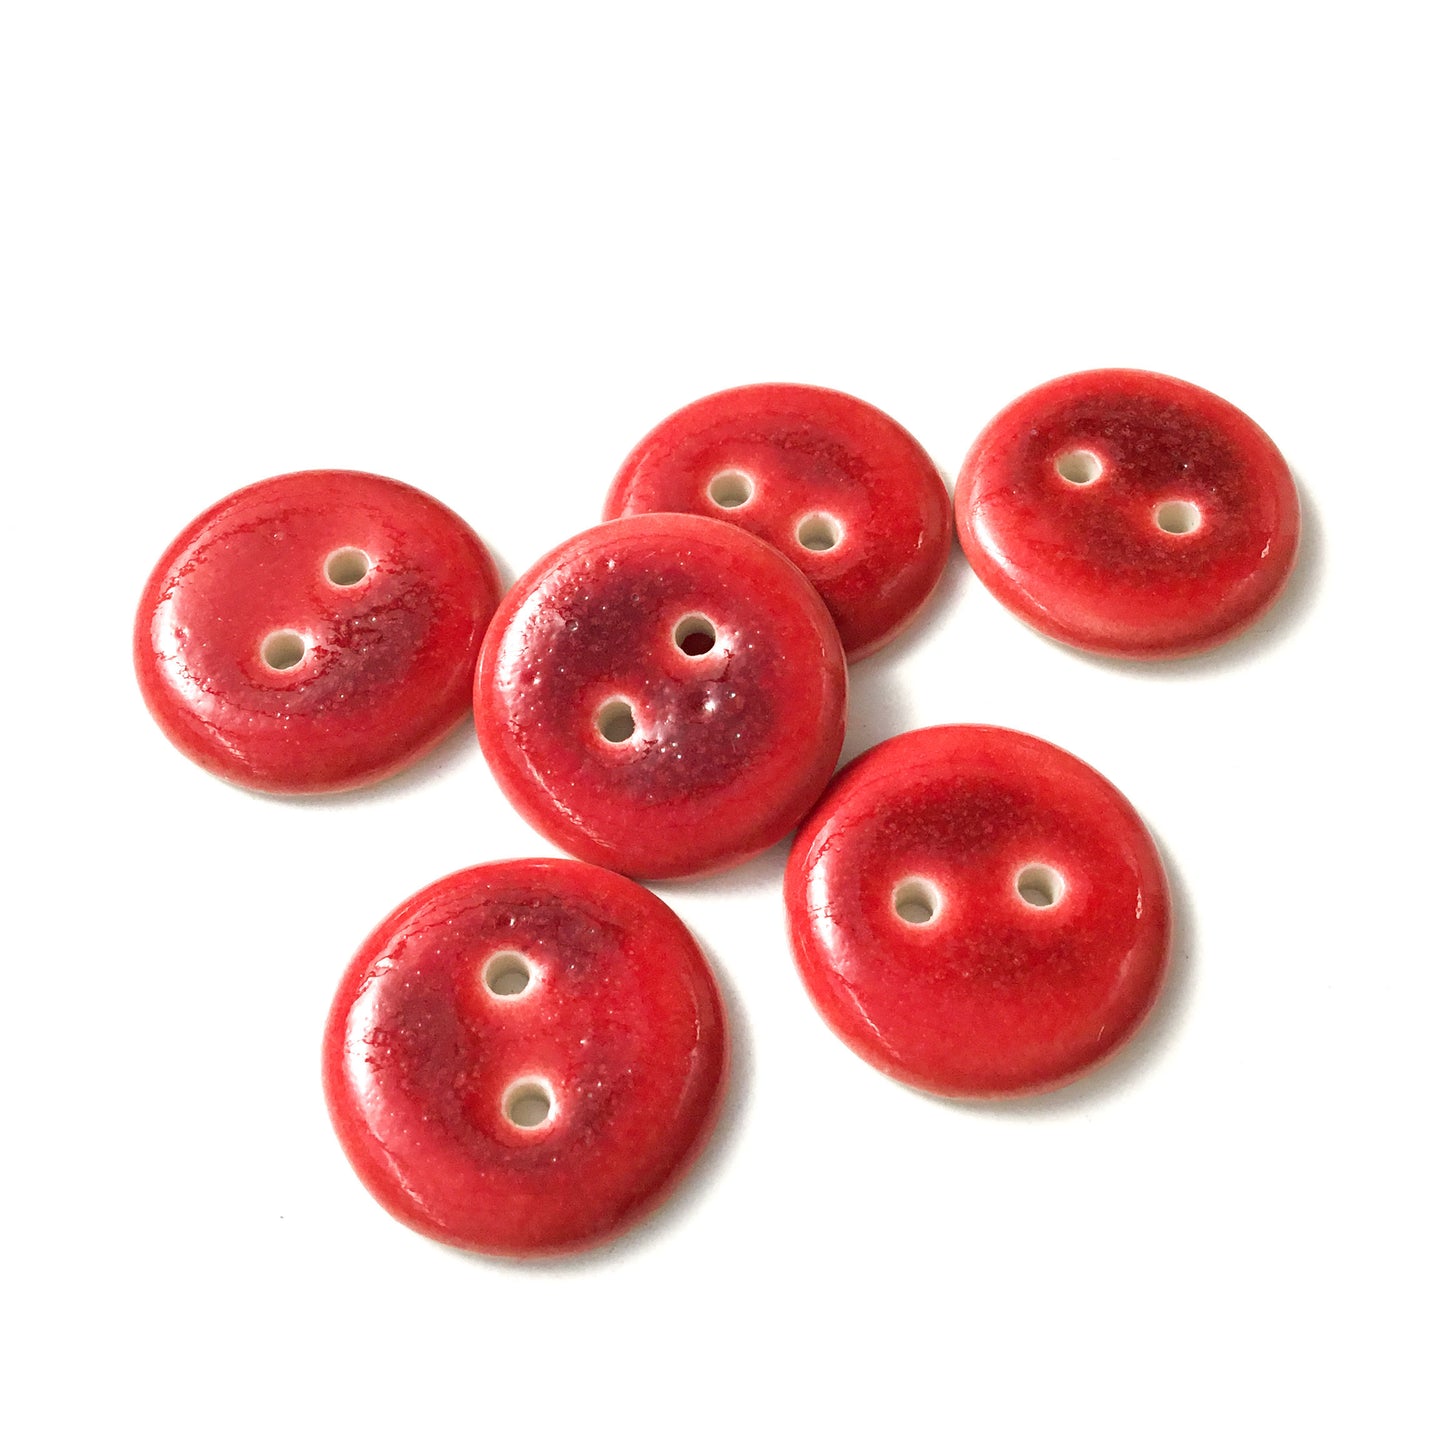 Deep Cherry Red Porcelain Buttons - Red Ceramic Buttons - 13/16" - 6 Pack